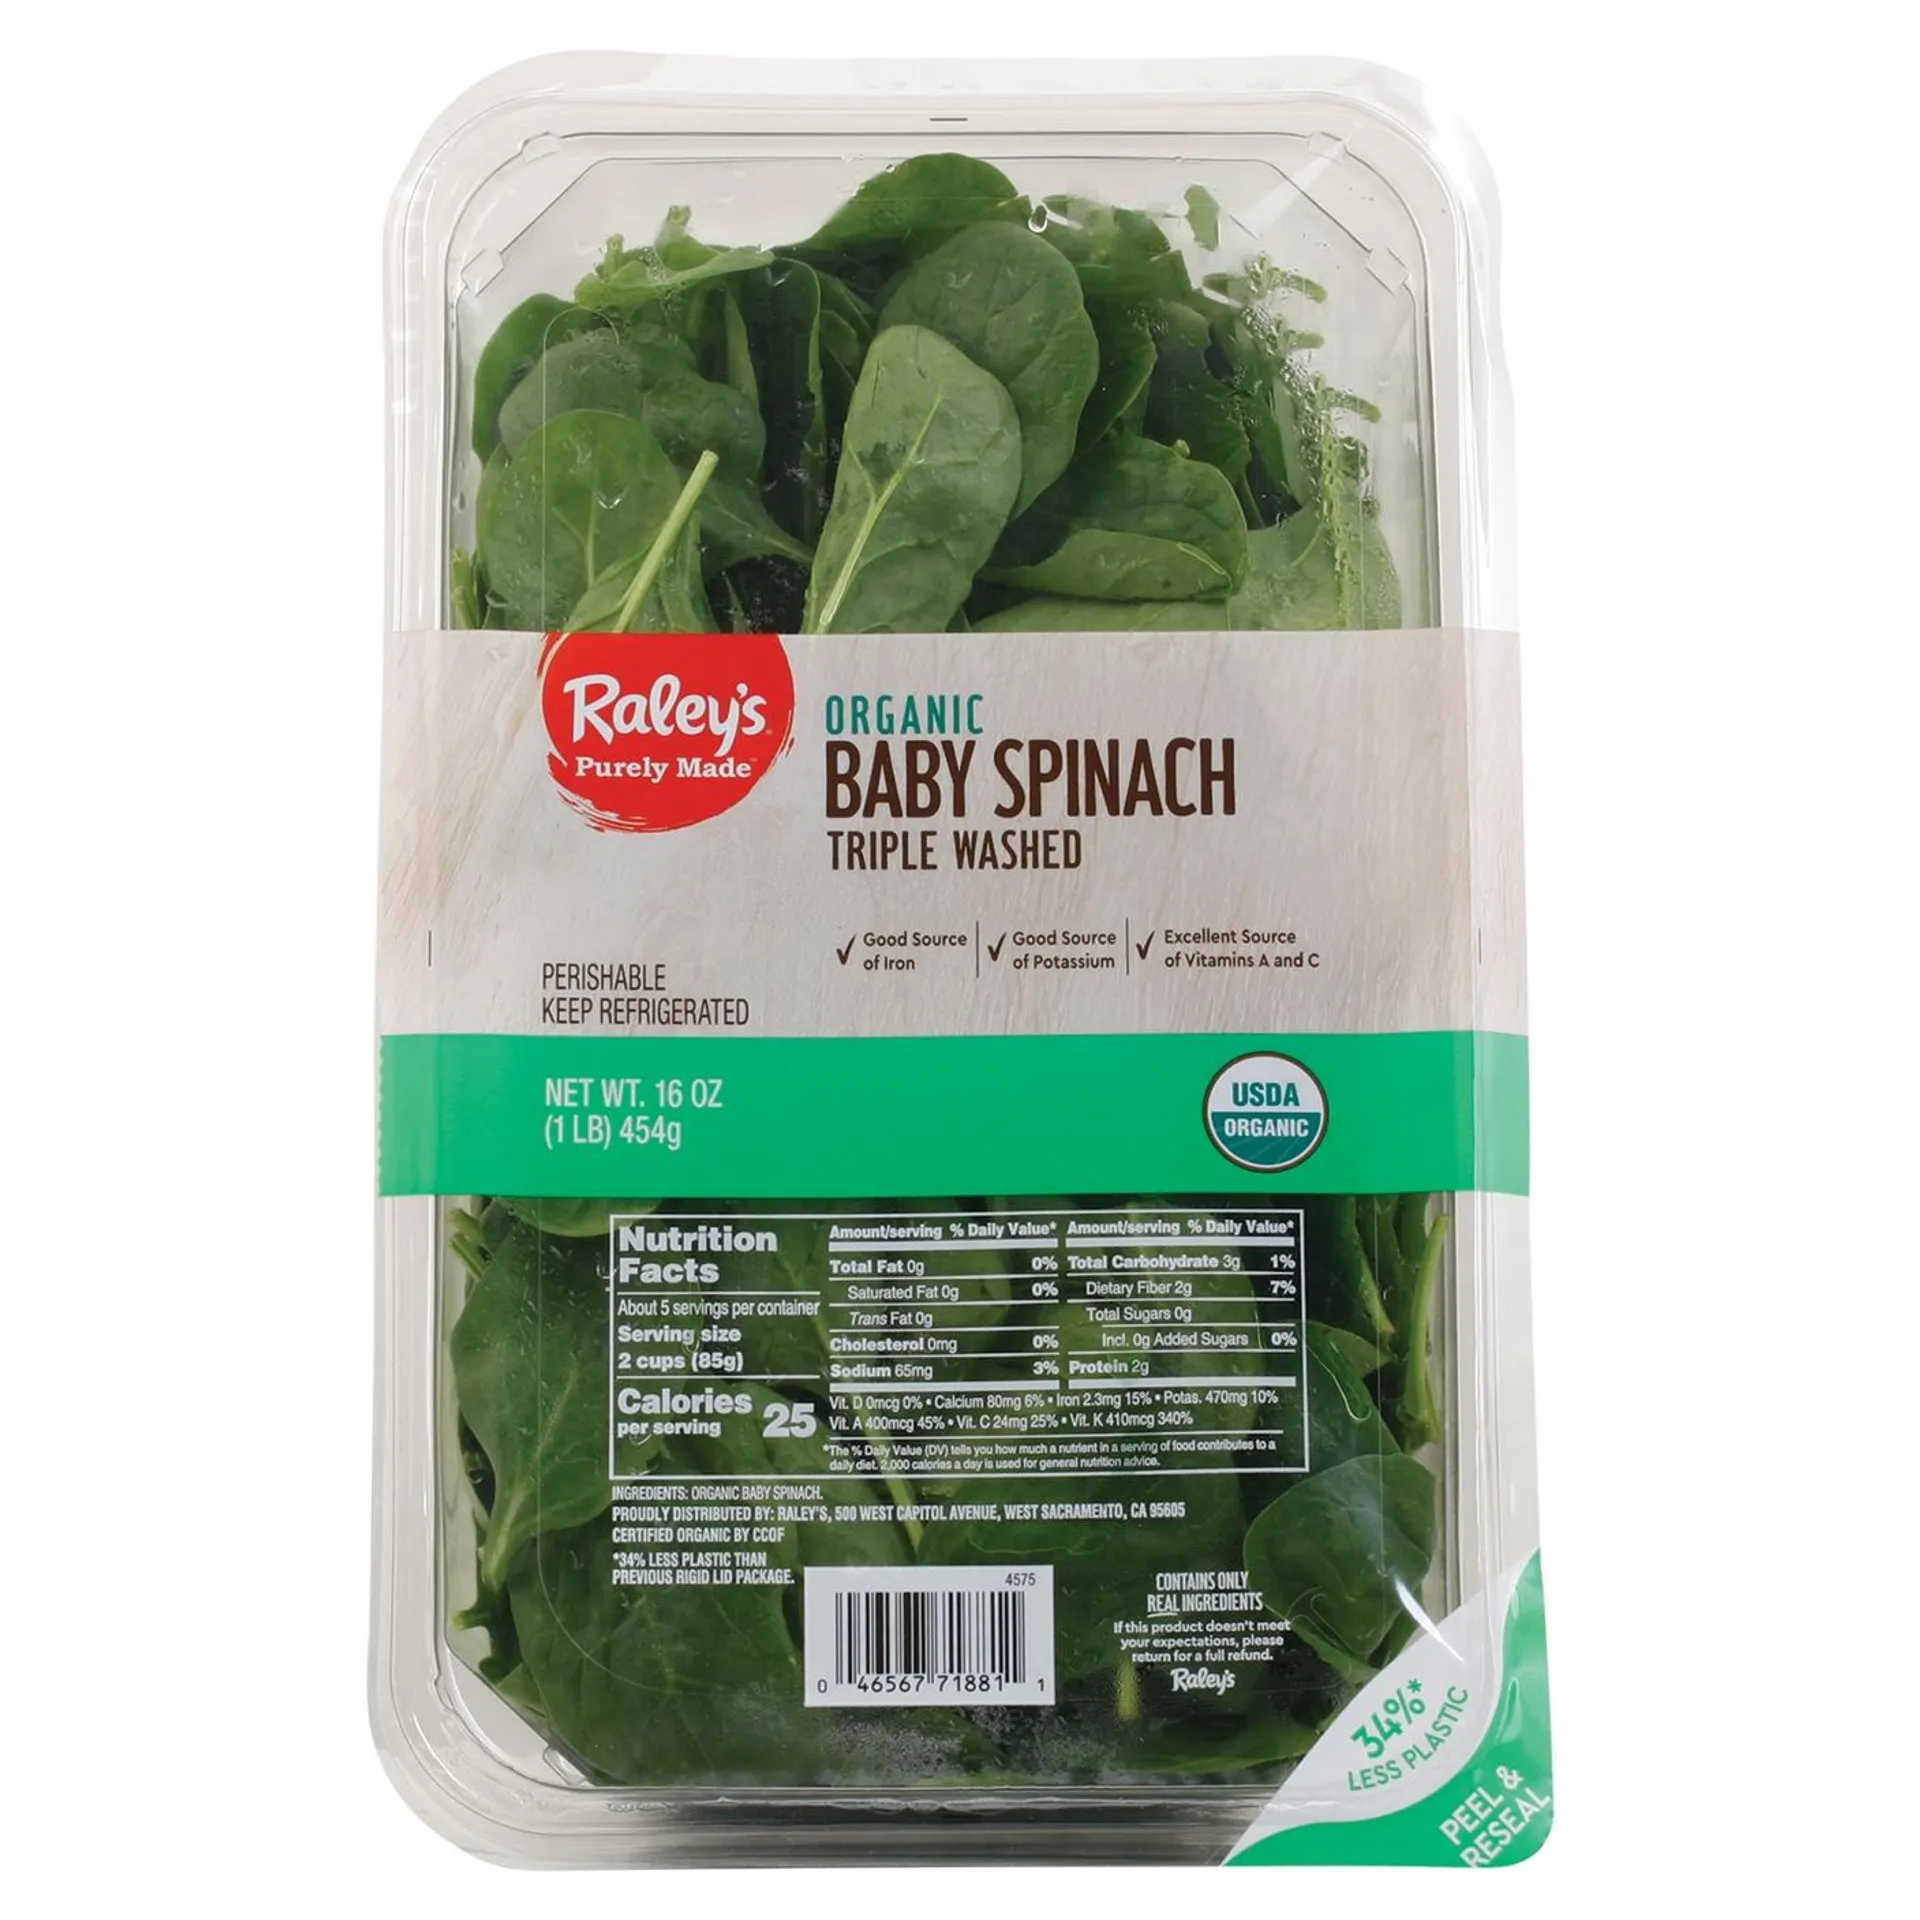 Raley's Baby Spinach, Organic, Triple Washed